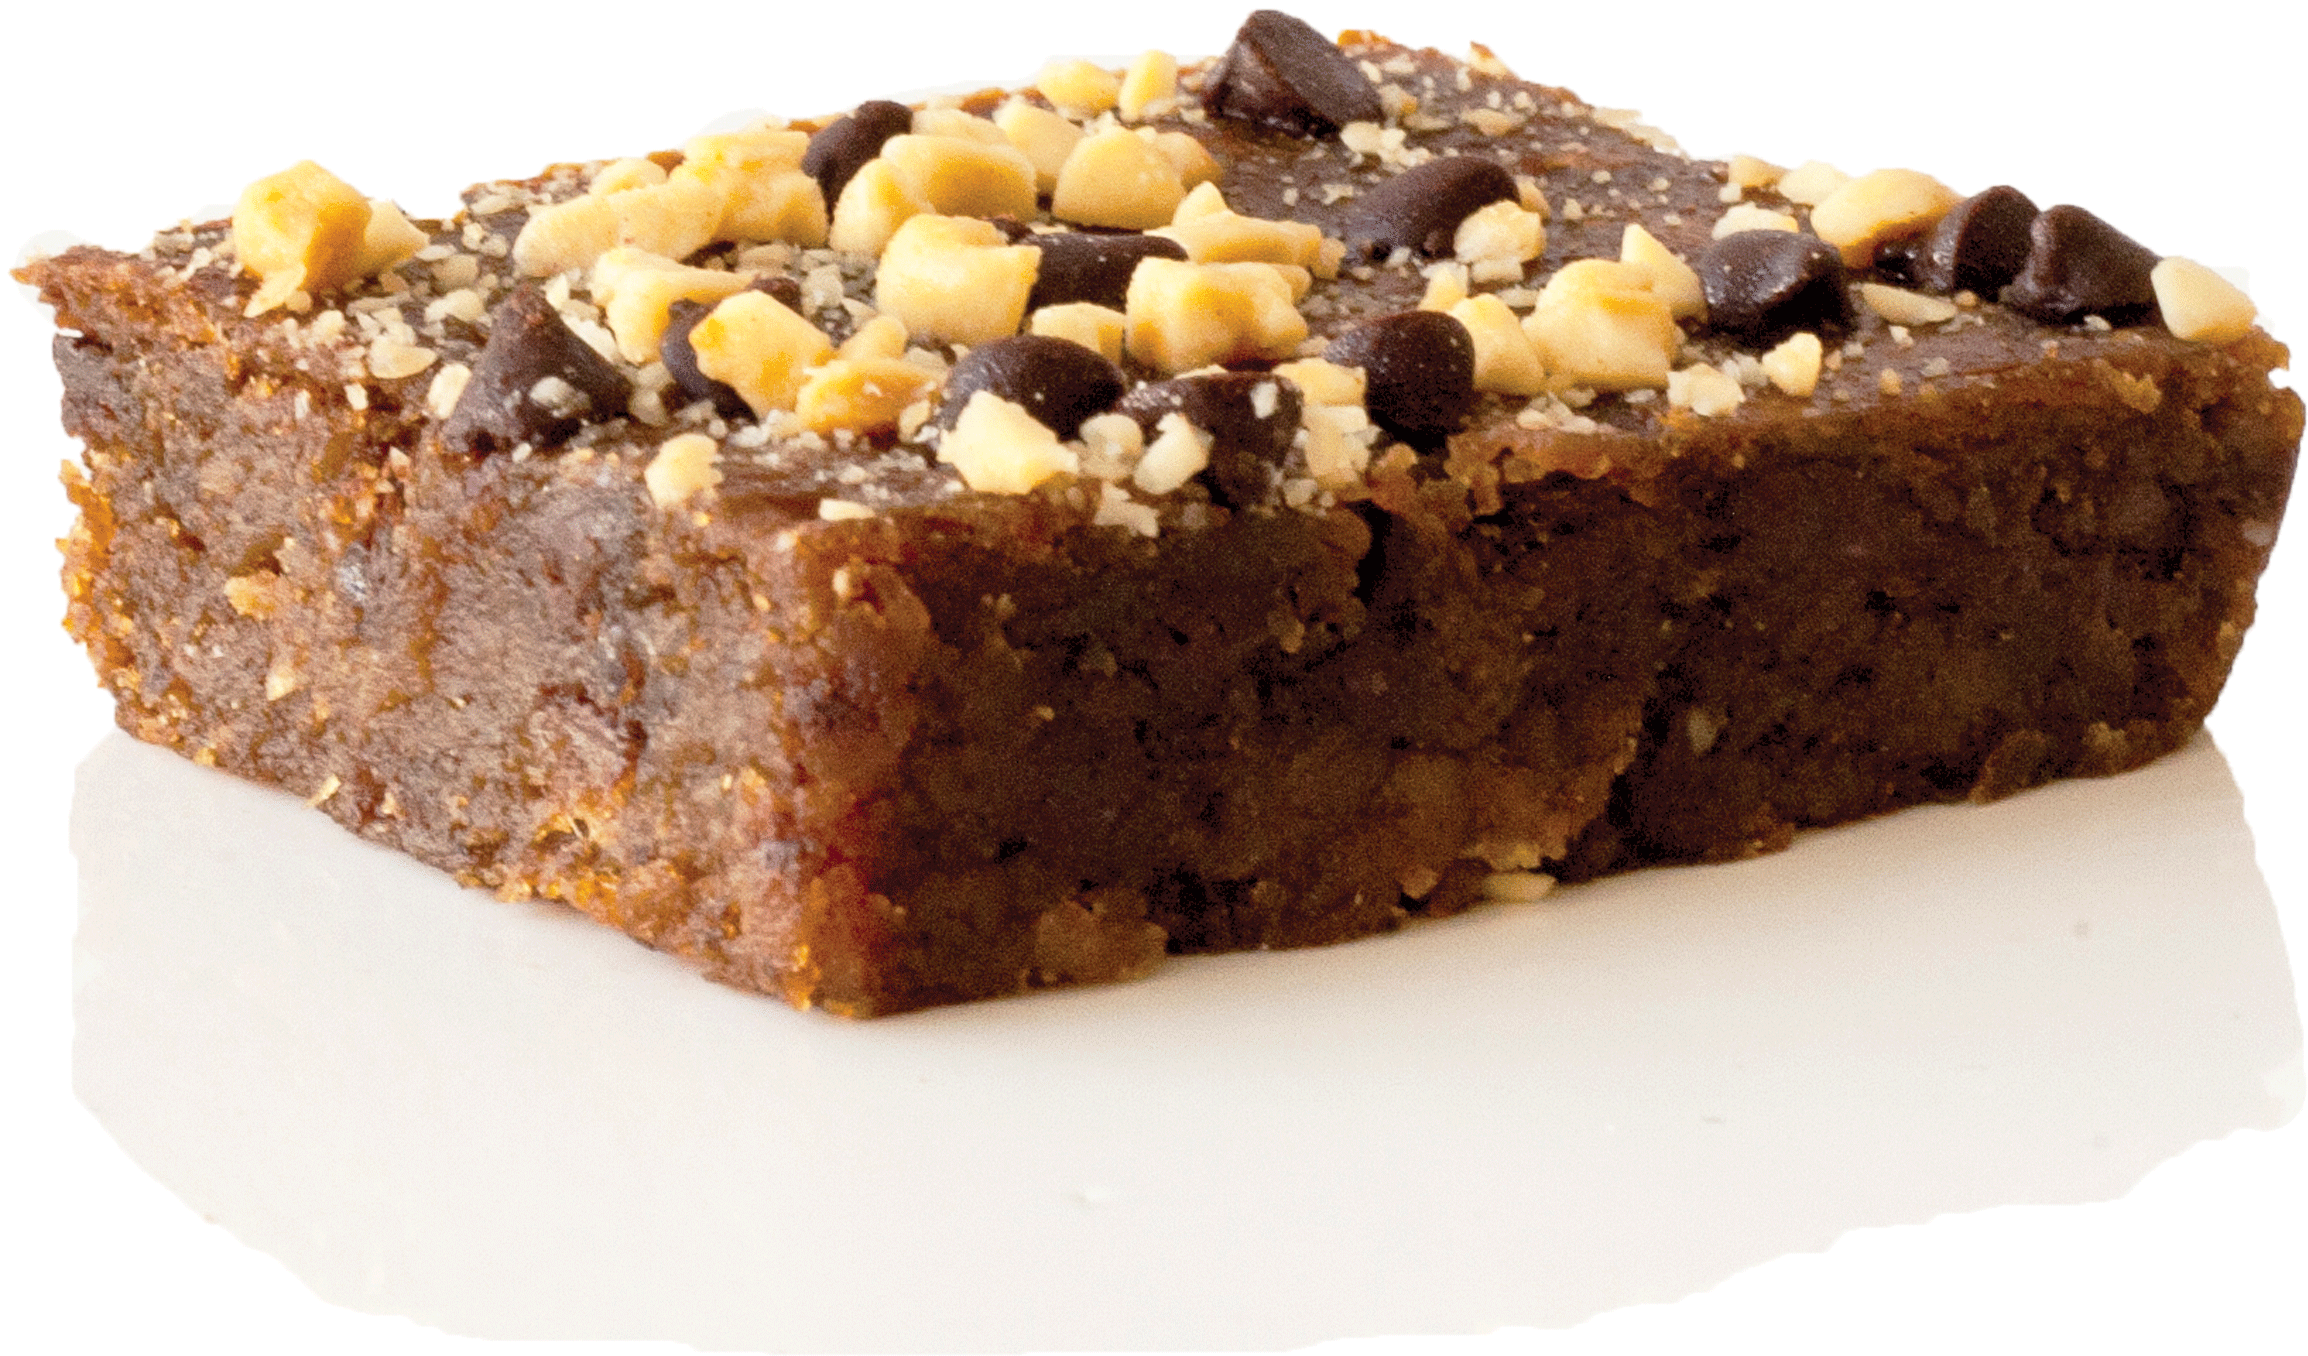 A Brownie With Chocolate Chips And Nuts